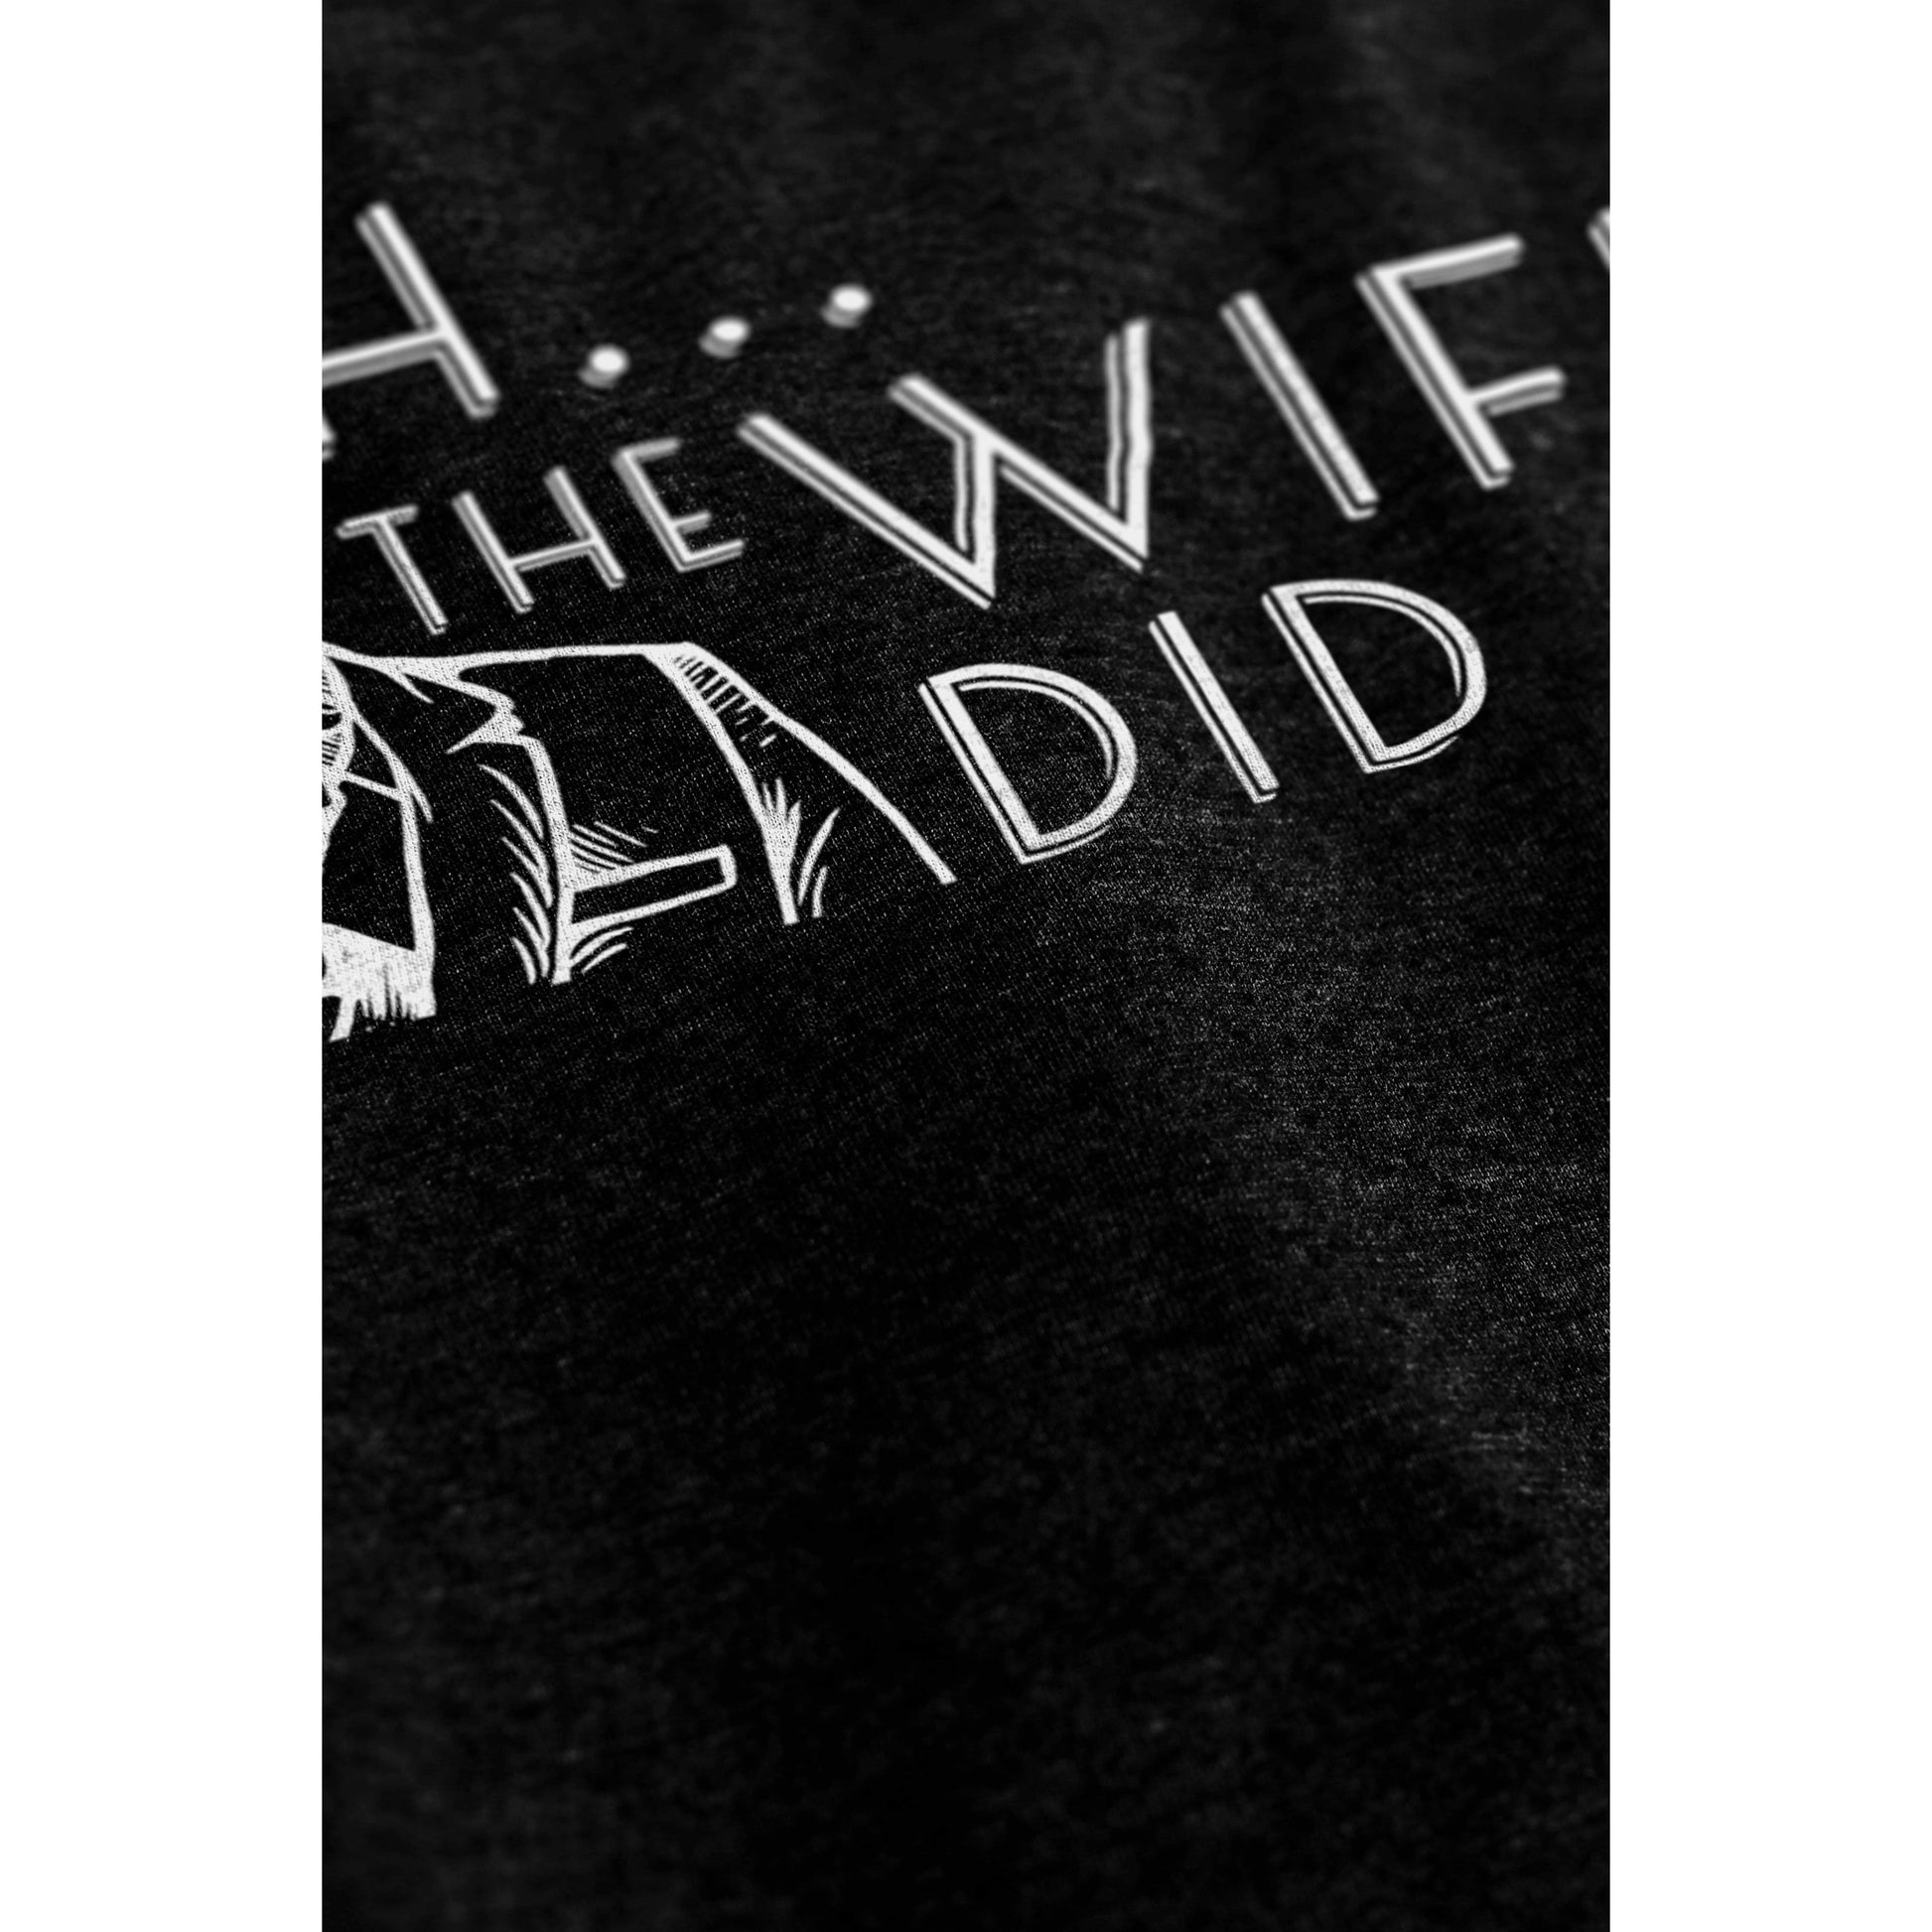 Shhh, The Wife Did It - threadtank | stories you can wear